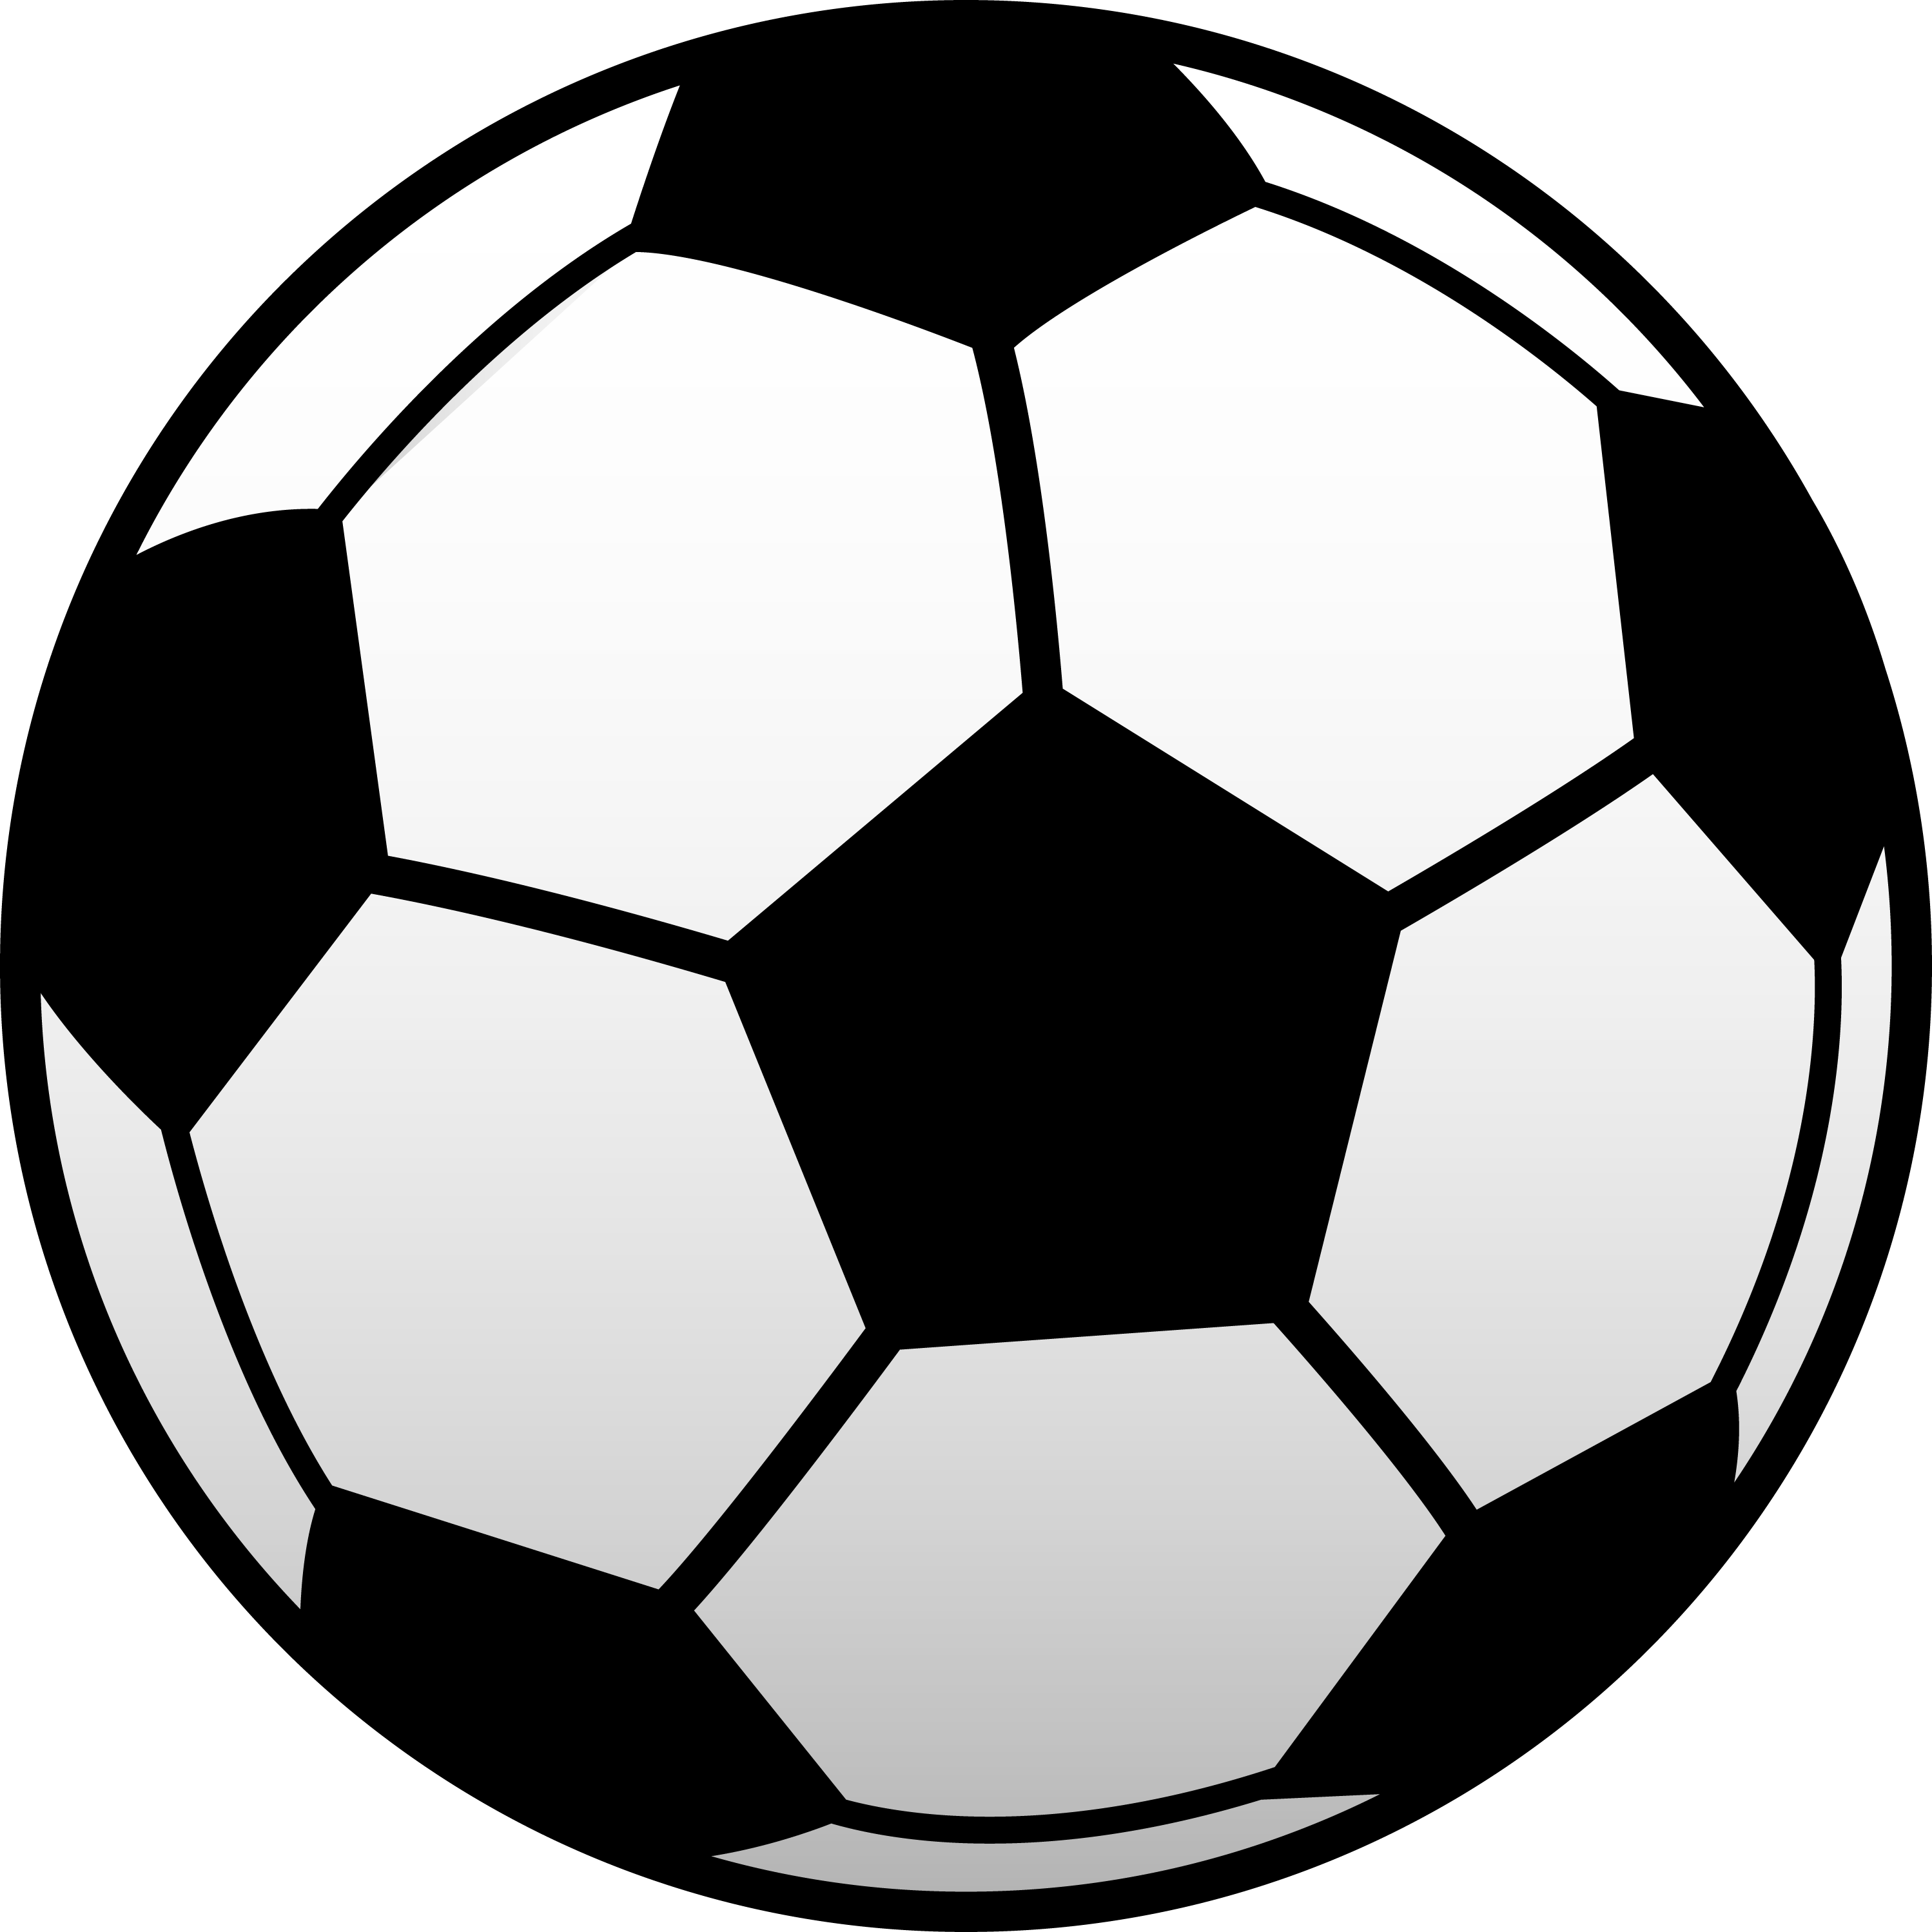 Free soccer ball pictures of 